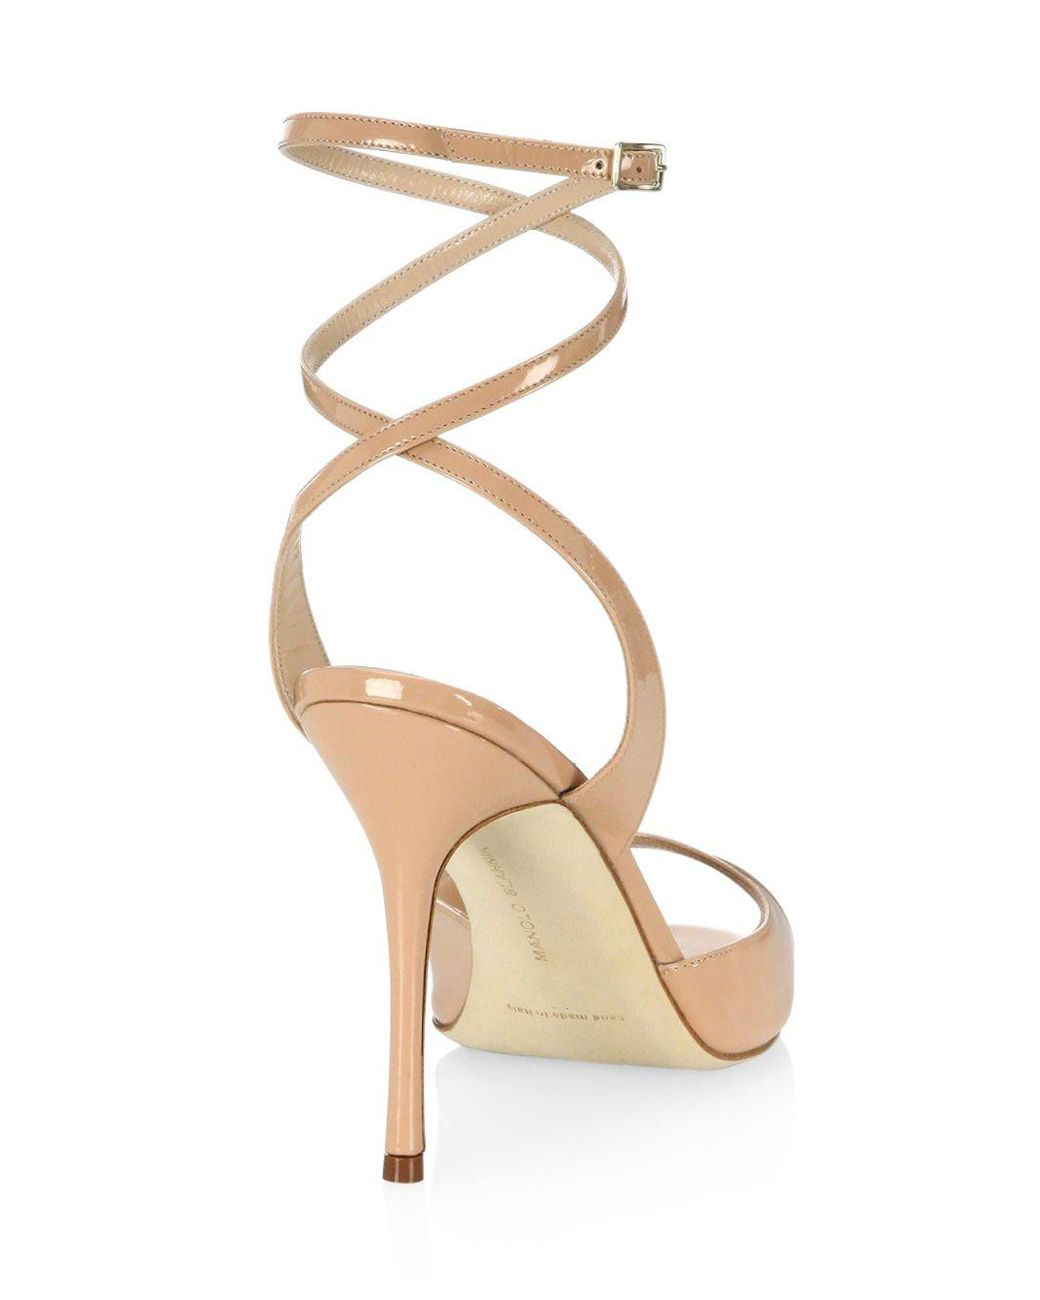 Manolo Blahnik Leather Bartagina Patent Ankle Strap Sandals in Nude  (Natural) | Lyst